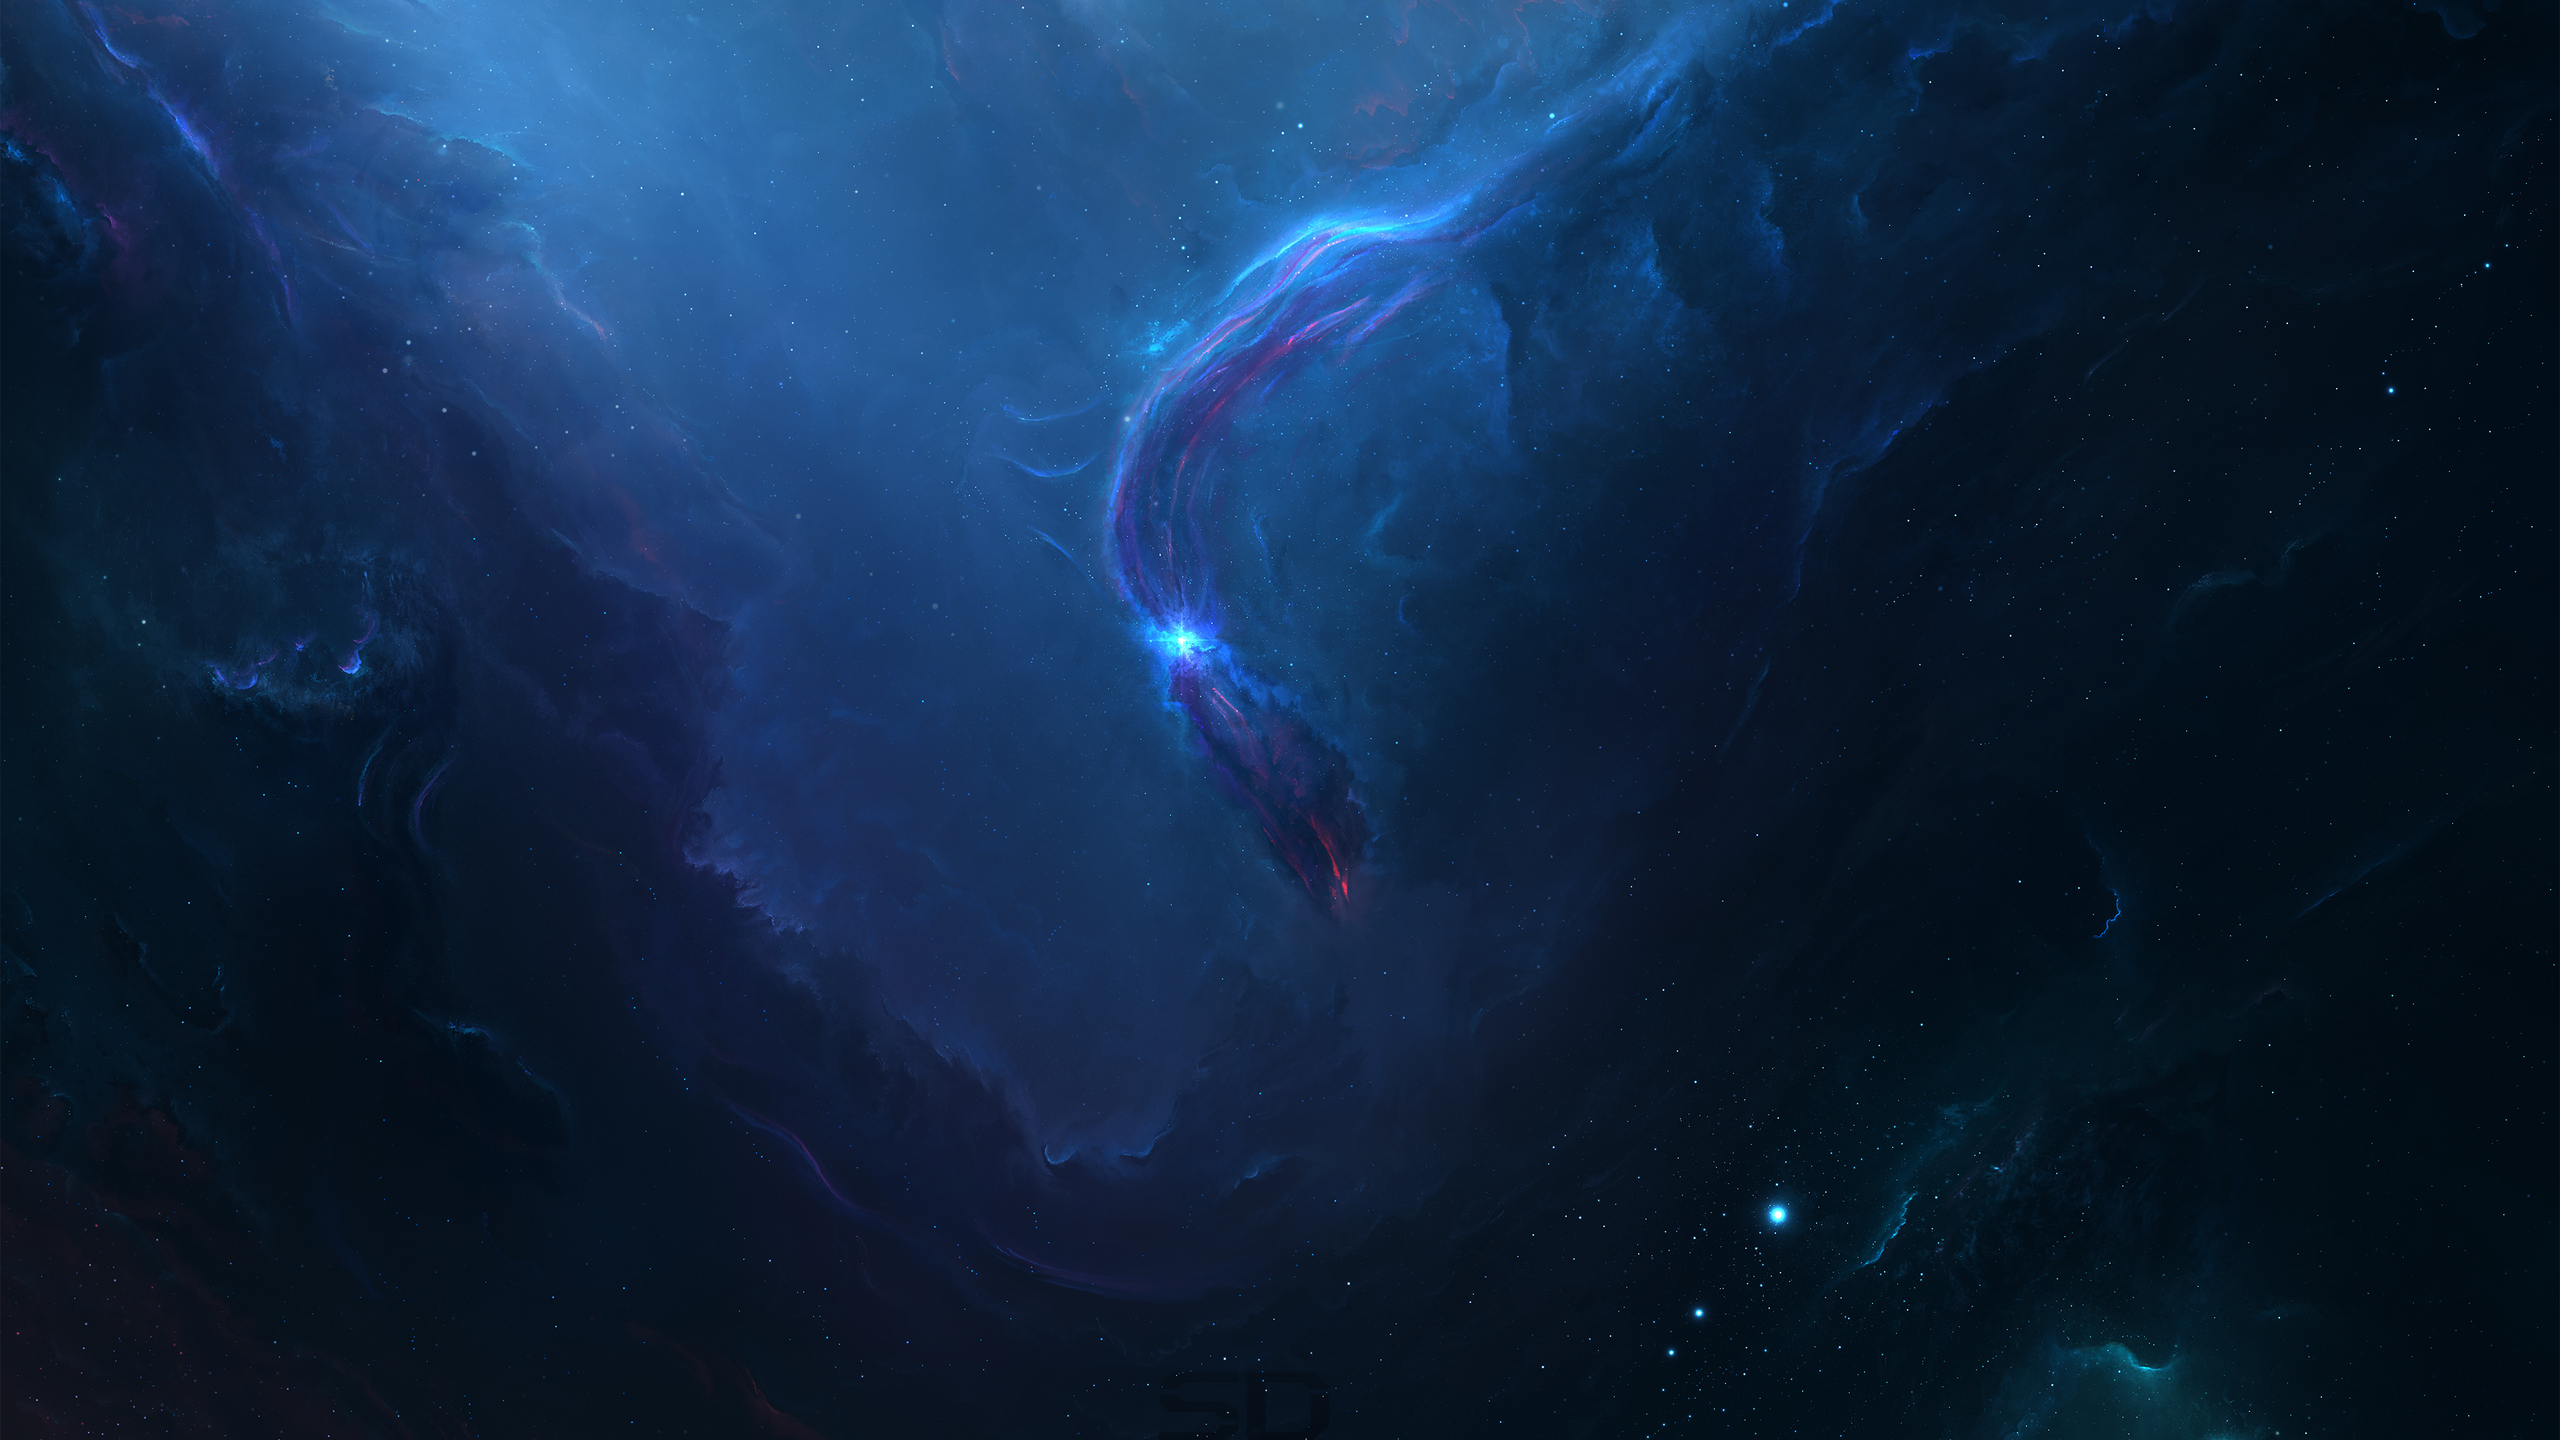 Download Image Explore the depths of the mysterious Neon Galaxy Wallpaper   Wallpaperscom